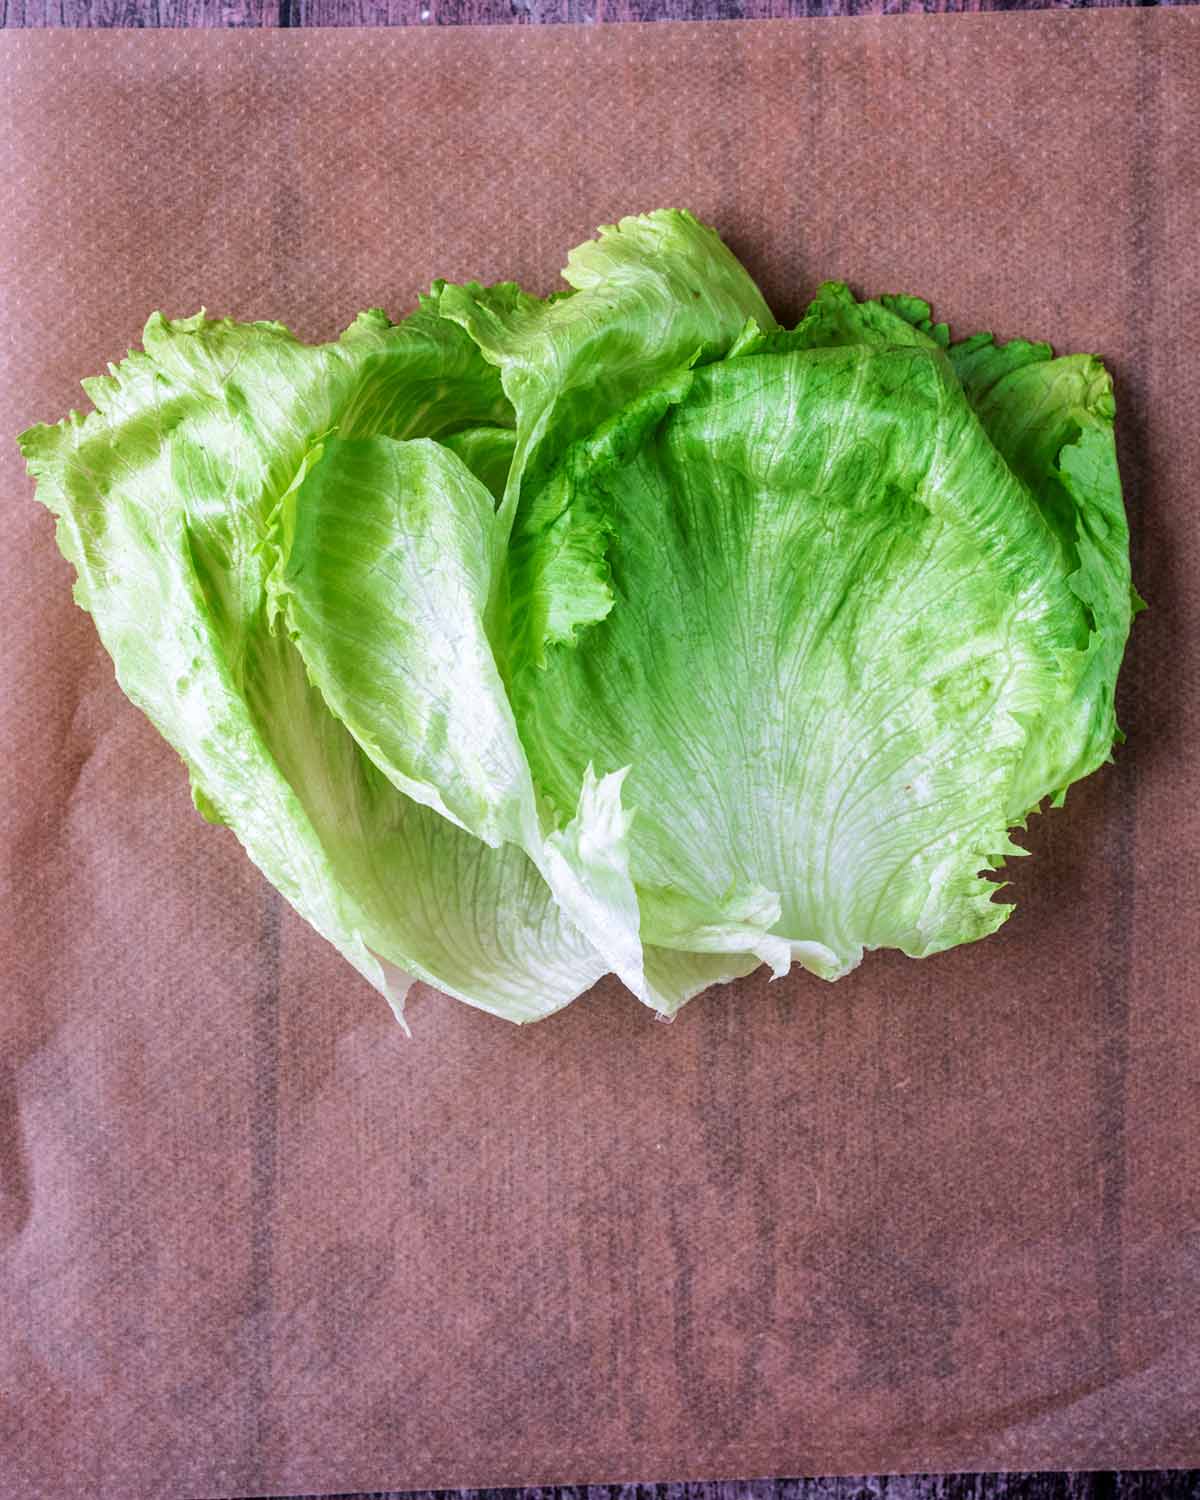 Three iceberg lettuce leaves on some parchment paper.